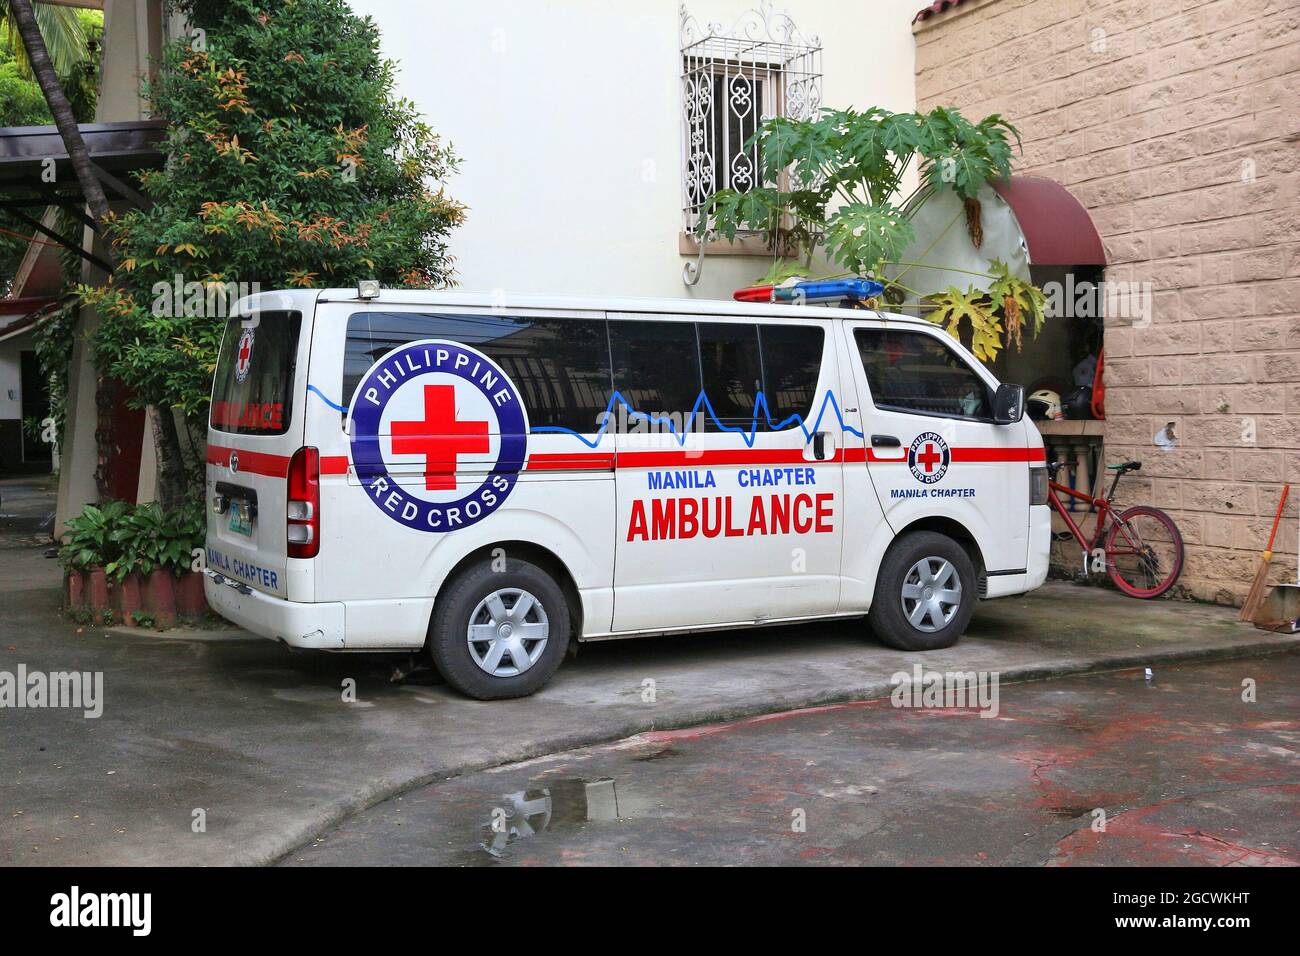 Persona Overeenkomstig Excursie MANILA, PHILIPPINES - NOVEMBER 24, 2017: Ambulance van of Philippine Red  Cross (PRC), a member of the International Red Cross and Red Crescent  Movemen Stock Photo - Alamy